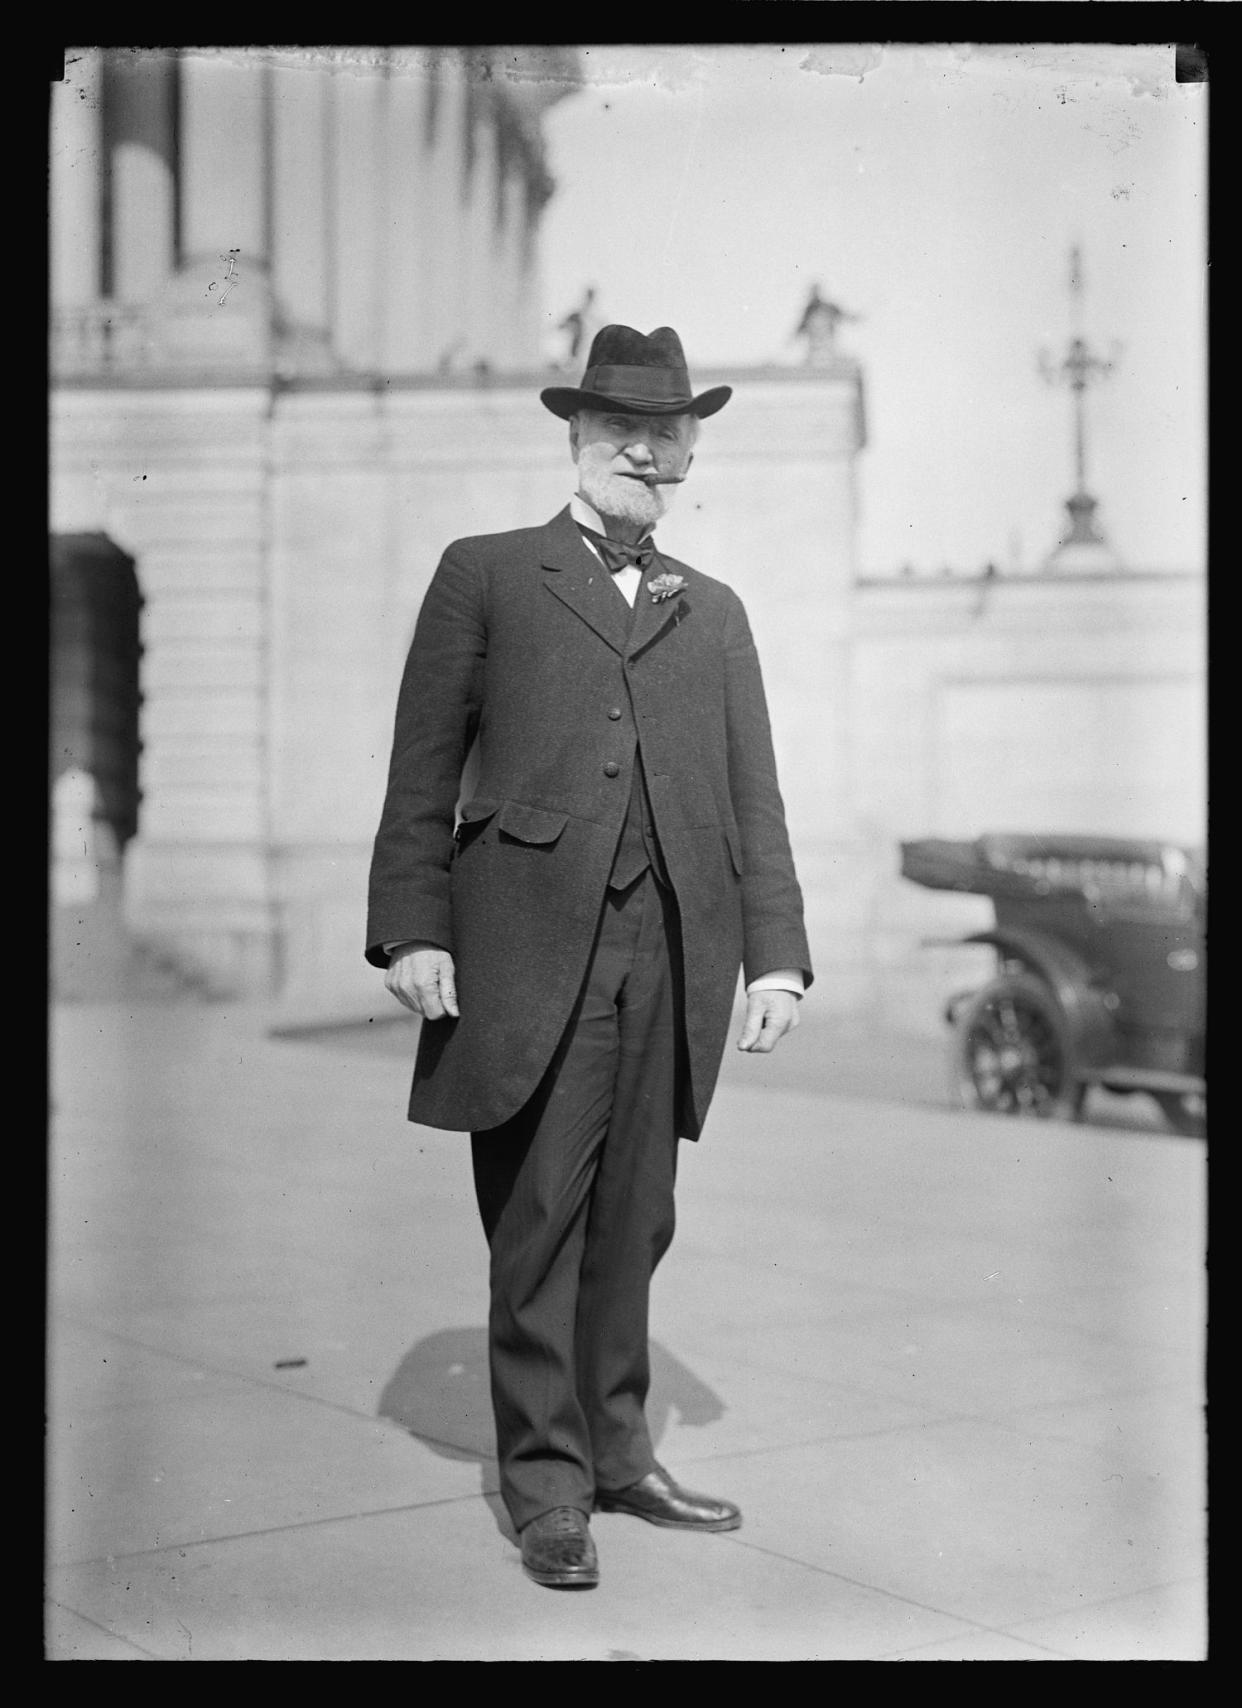 Joseph G. Cannon poses for a photograph with a cigar. (Harris & Ewing Collection / Library of Congress)